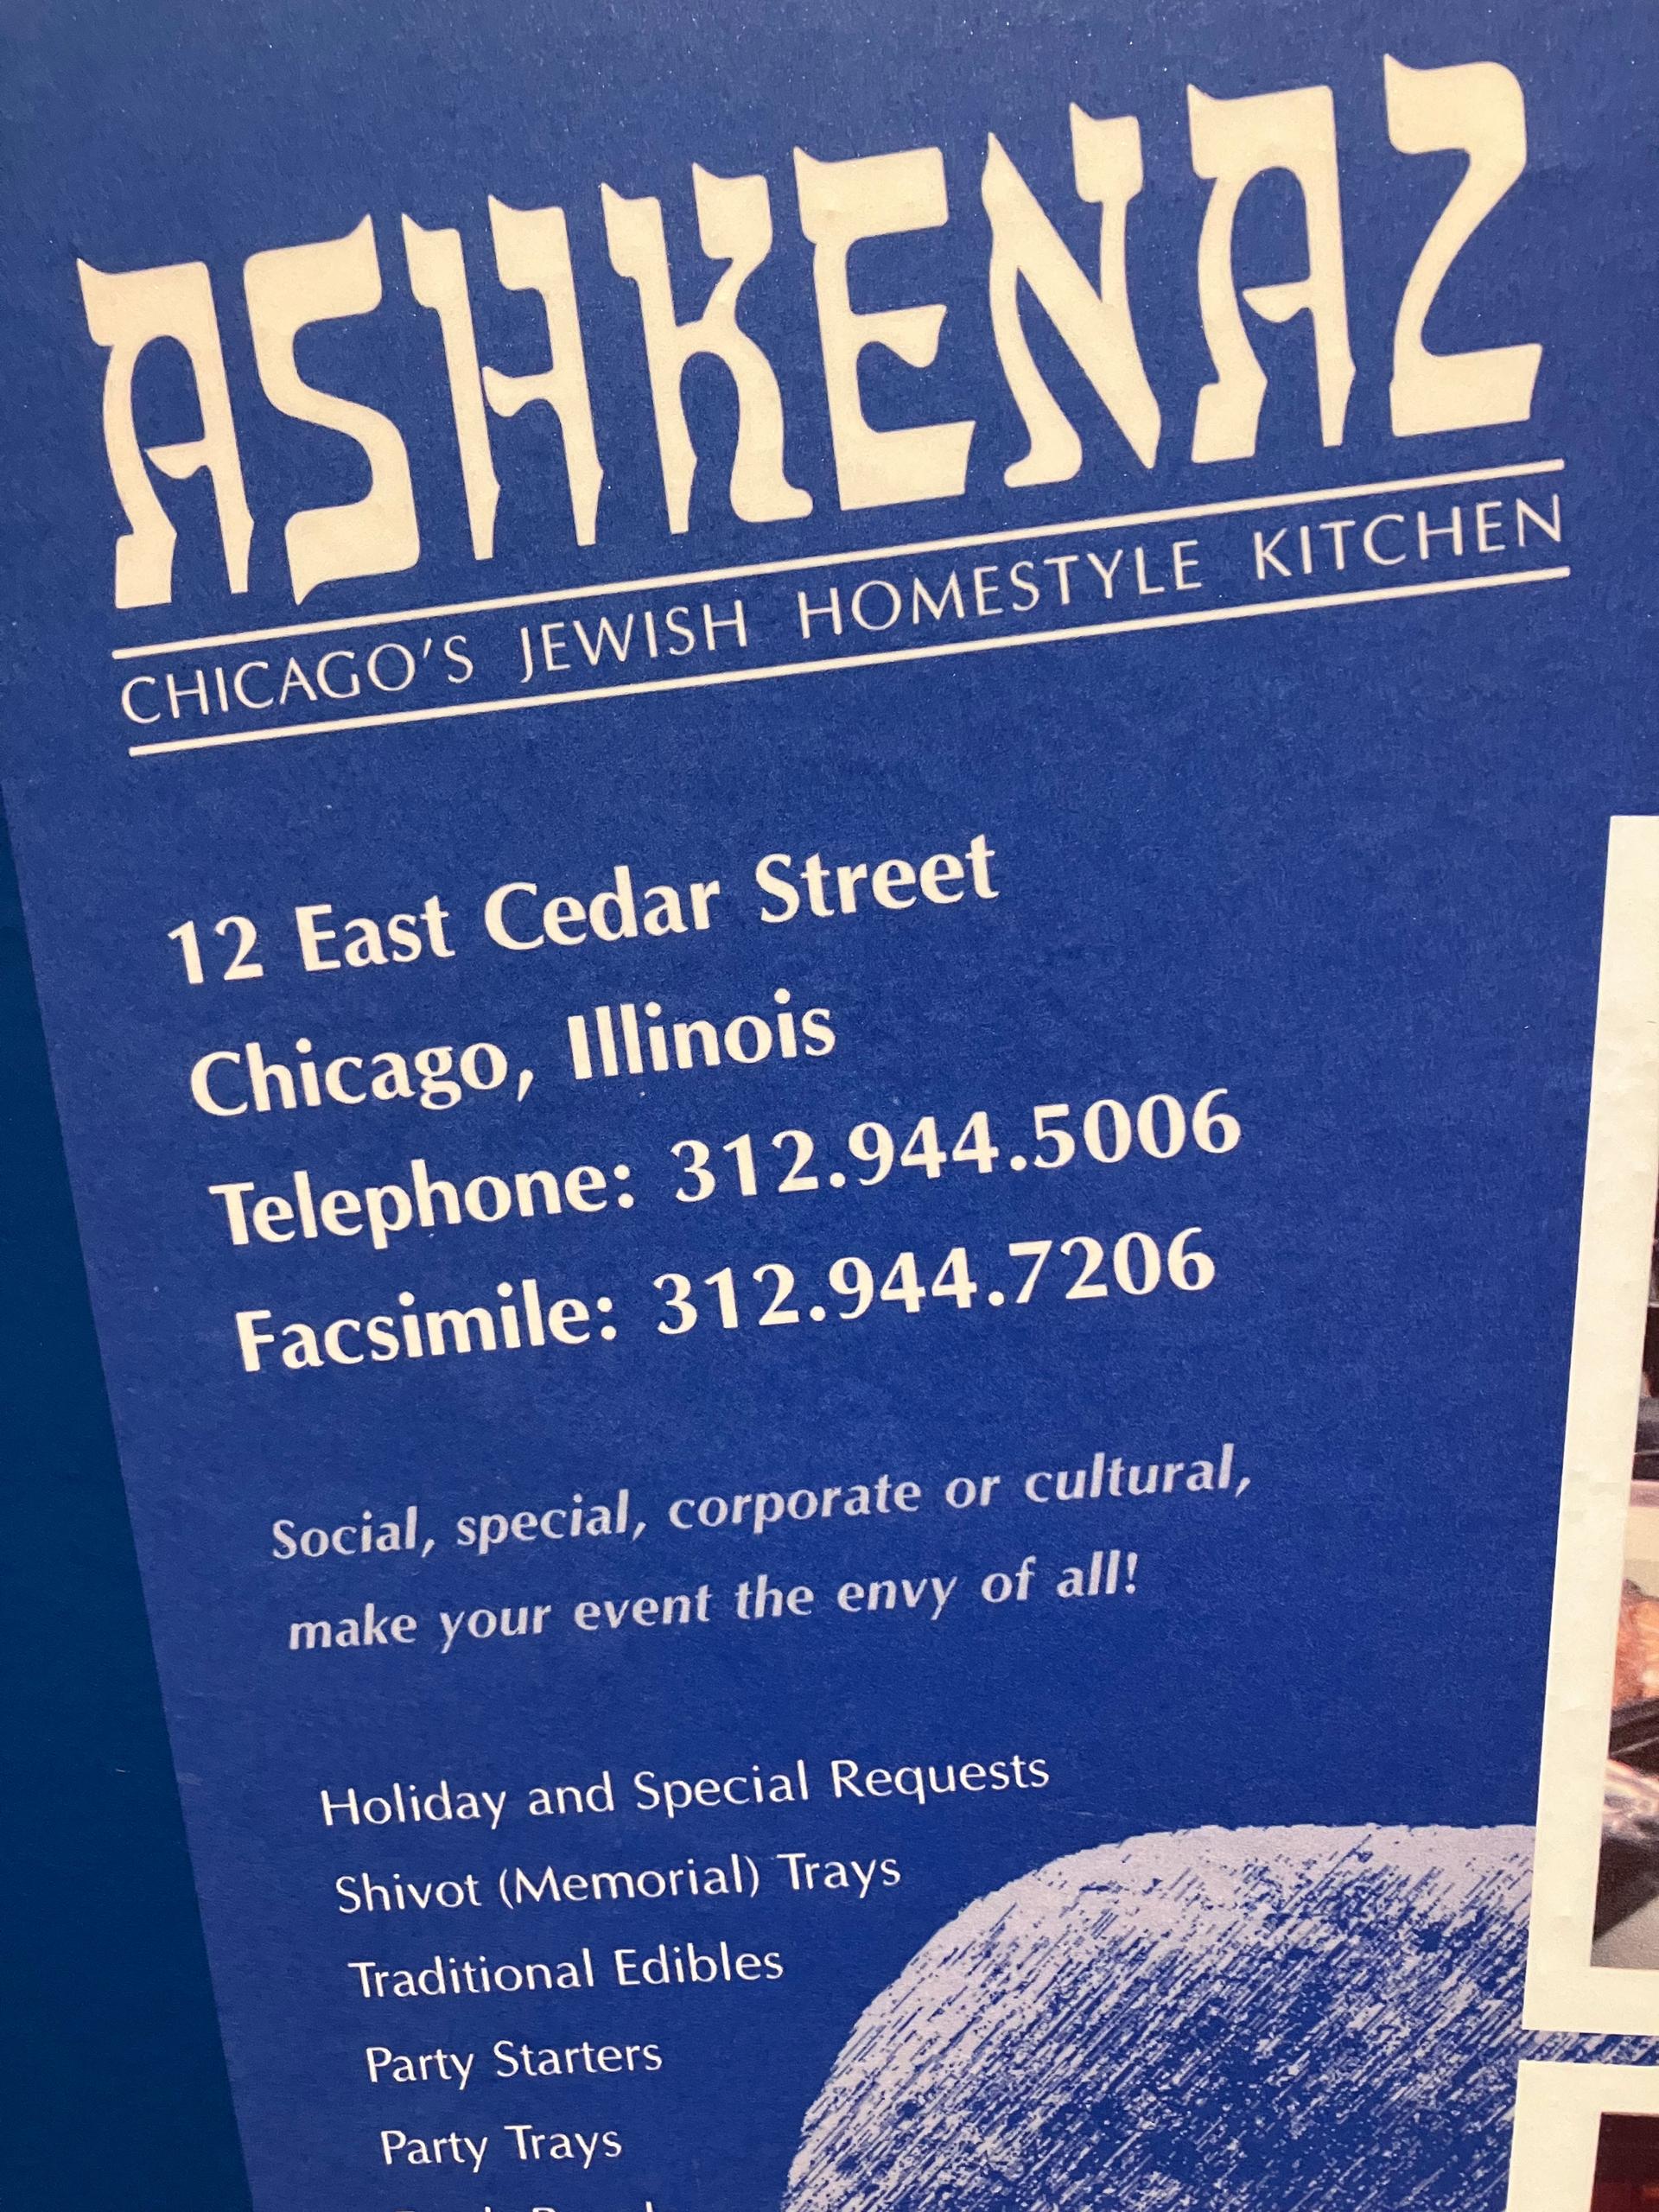 An image of an Asheknaz deli menu is on display. This deli was a favorite on Chicago's north side from1940 until the early 1970s, when it closed due to a combination of changing clientele and food trends.